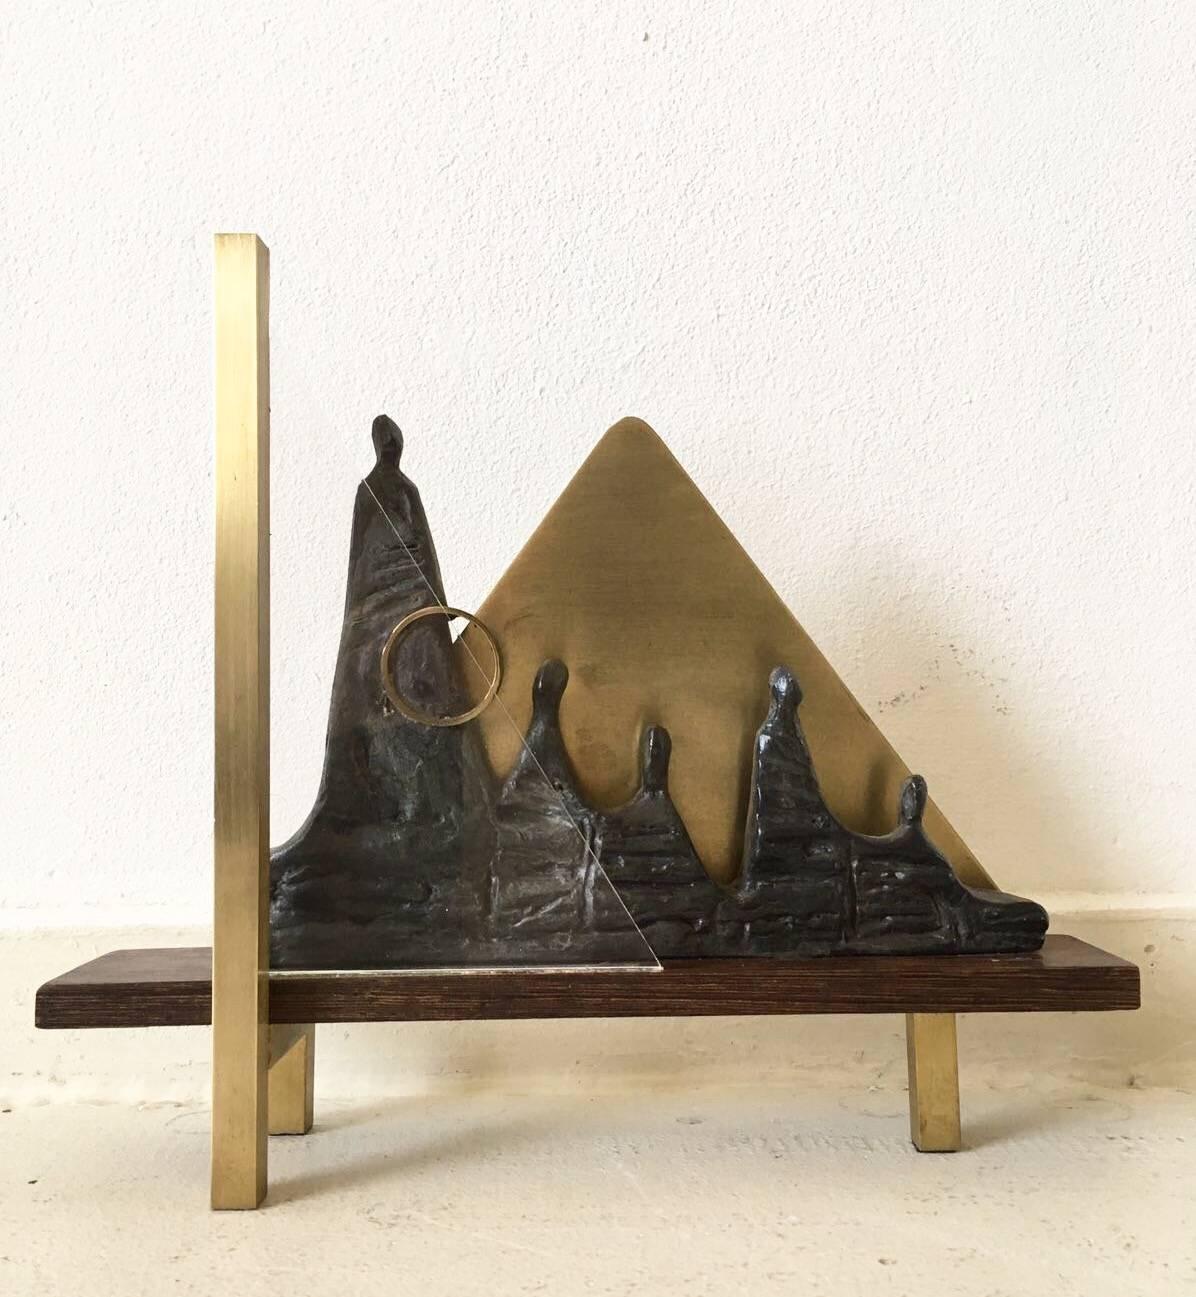 This stunning and unique piece of work was created by Judith Braun in the late 1980s. 

It features people in bronze that sit on a wengé wooden base. Behind them, a triangular form in brass probably simulating a pyramid.
At the front, a brass